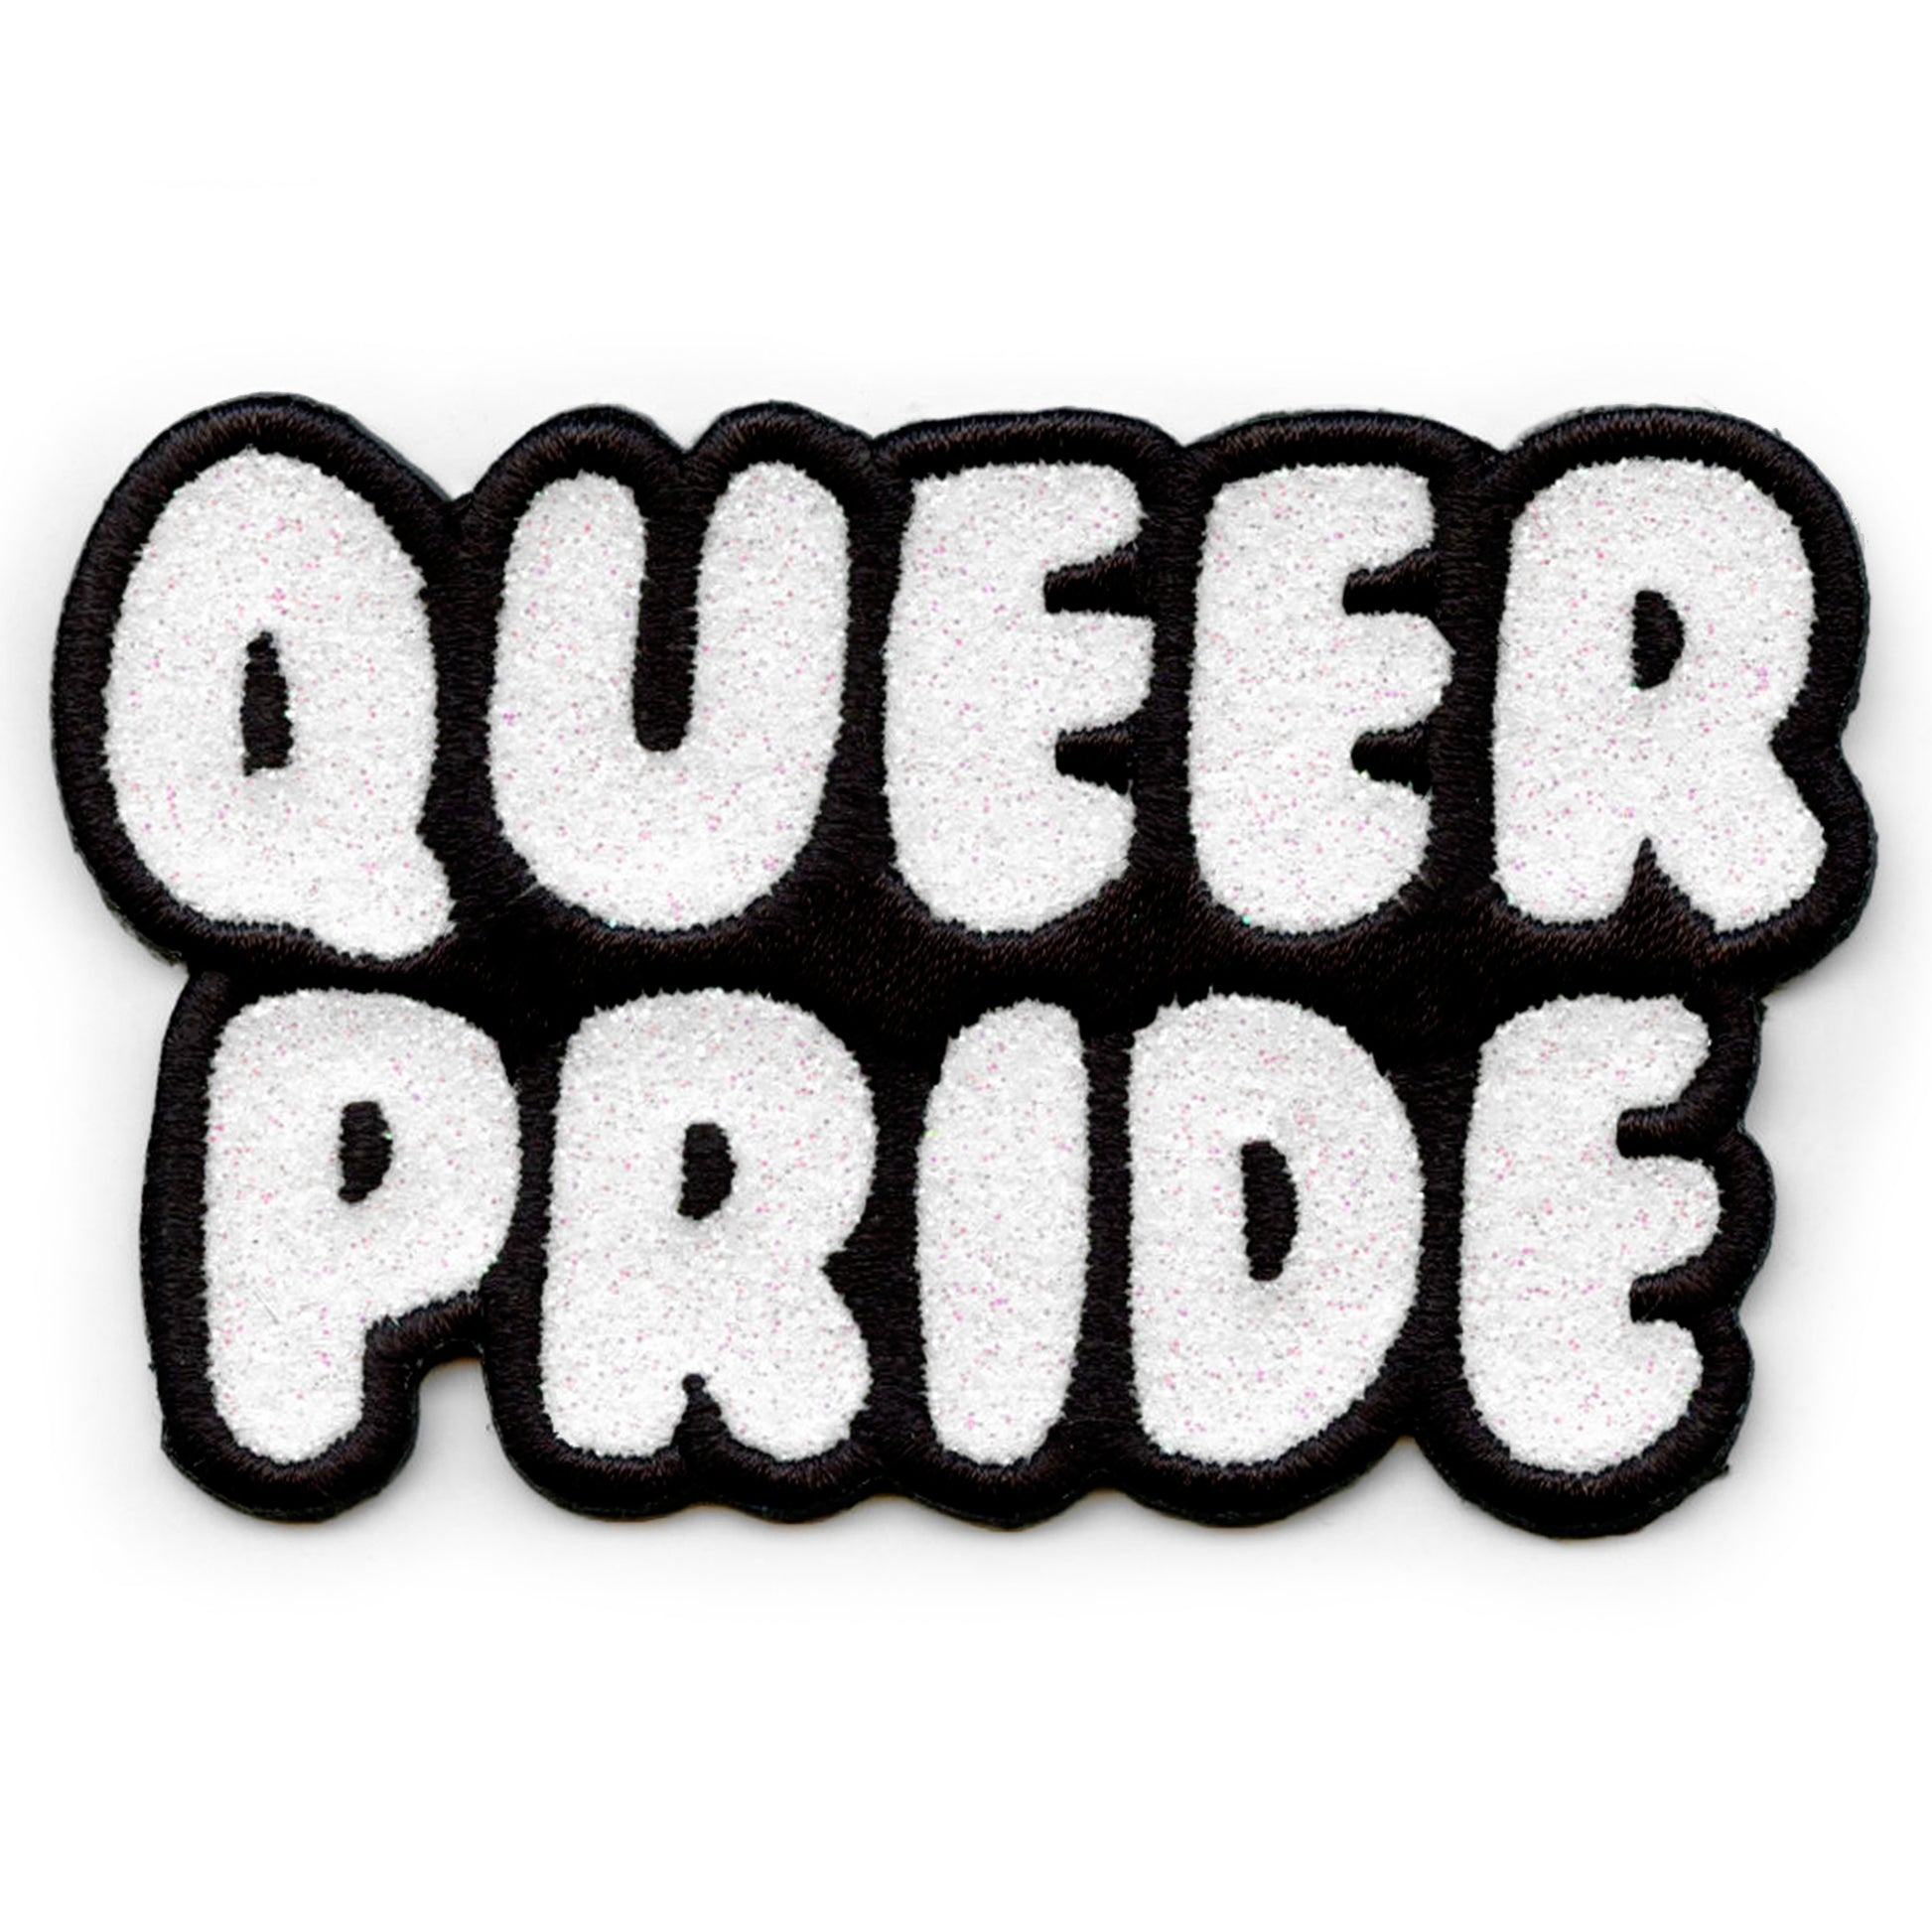 Queer Pride Script Patch Inclusive LGBTQ+ Community Embroidered Iron On